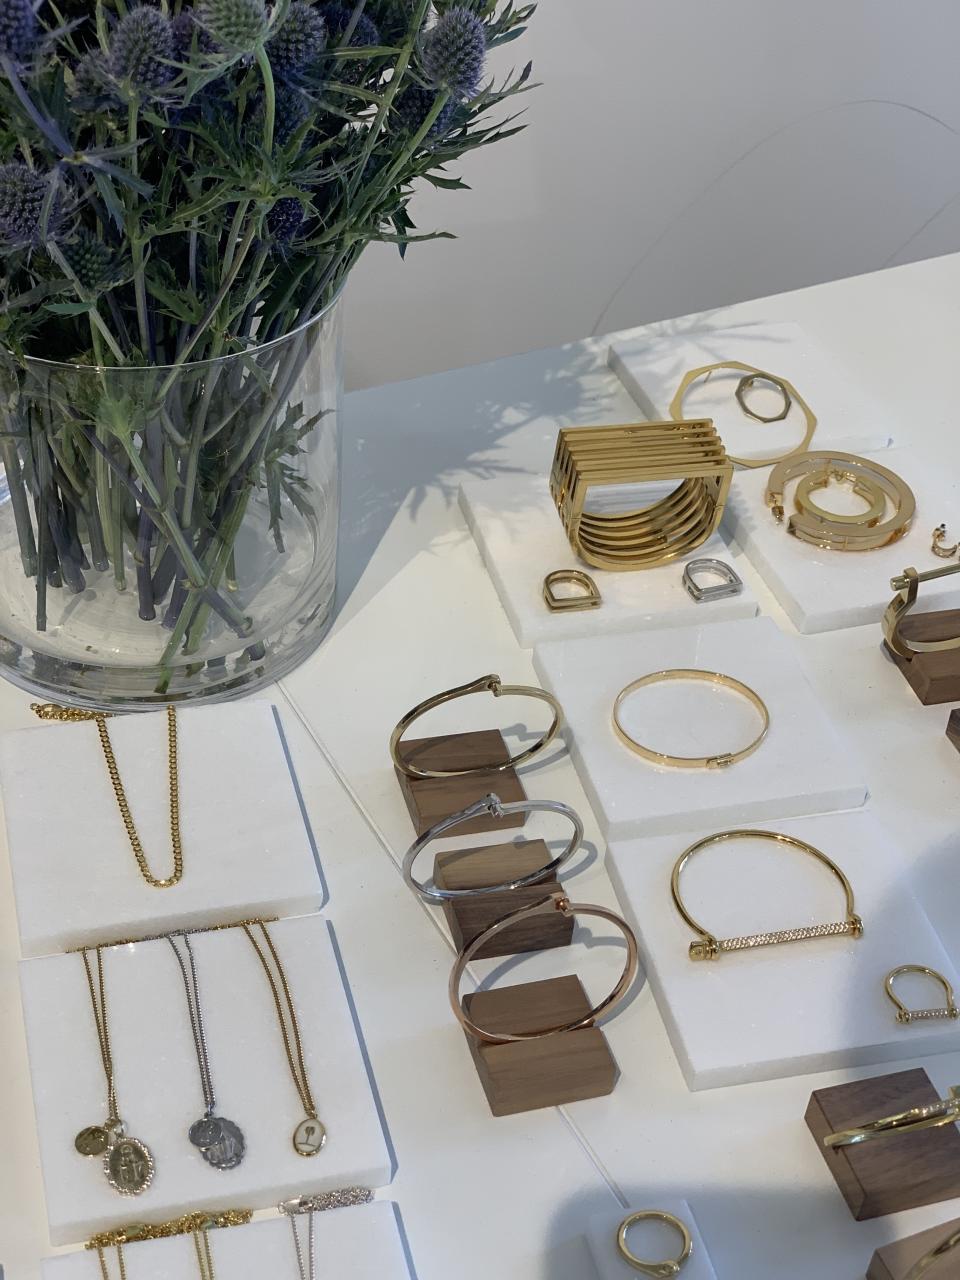 <h1 class="title">Stopped by the Miansai table in the Fortezza da Basso to talk about their new men’s fine jewelry collection along with bespoke men’s engagement ring services.</h1><cite class="credit">Photo: Justin Fernandez</cite>